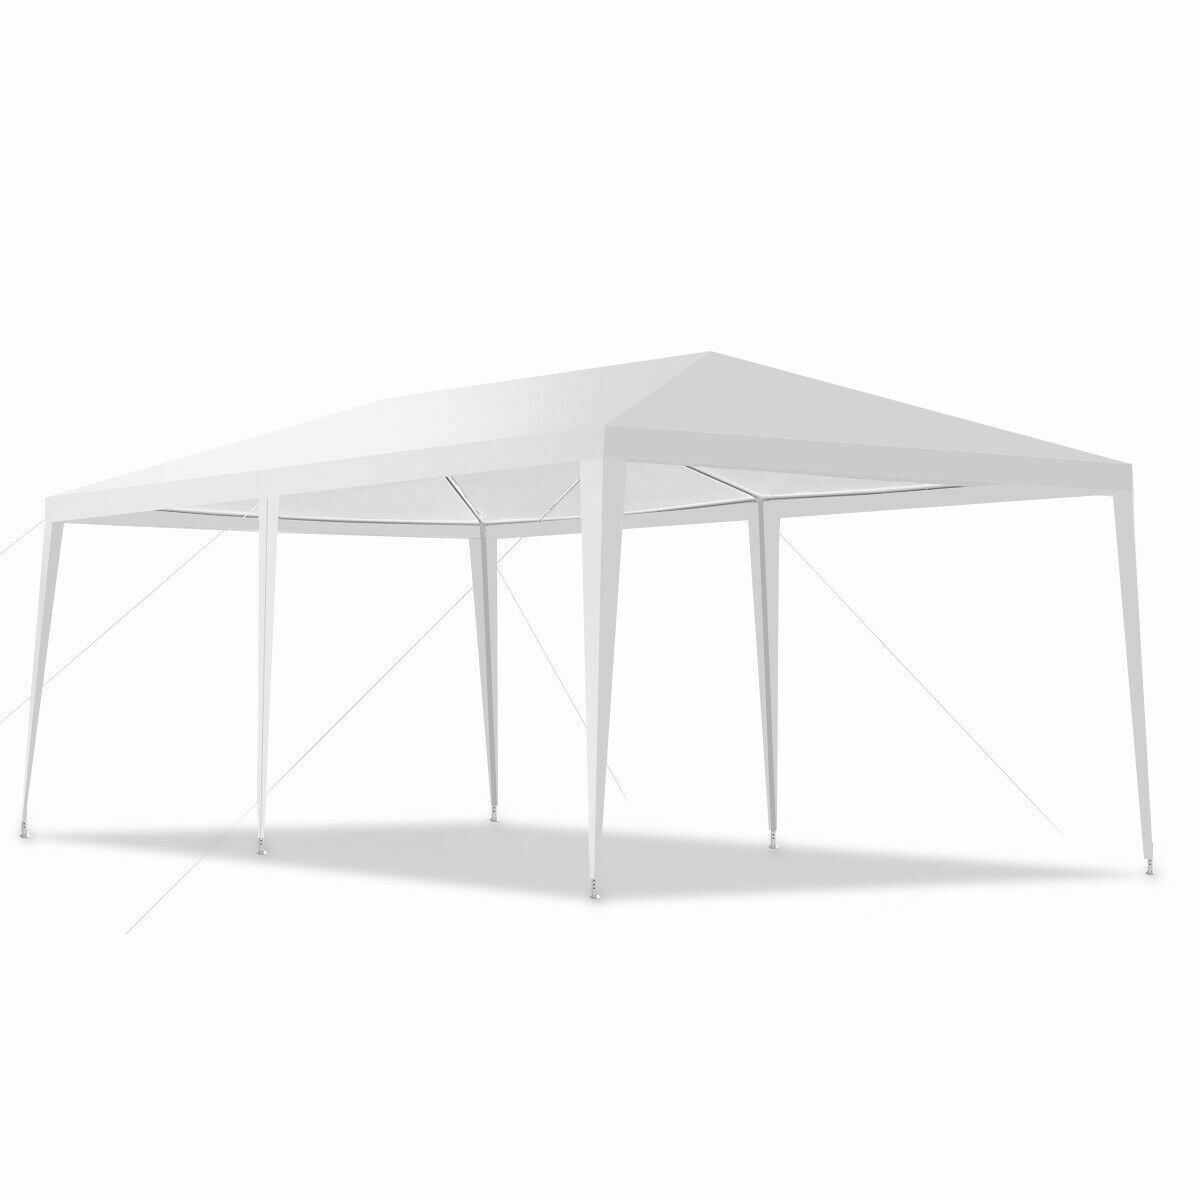 10 Ft. x 20 Ft. Canopy Tent Wedding Party Tent 6 Sidewalls With Carry Bag